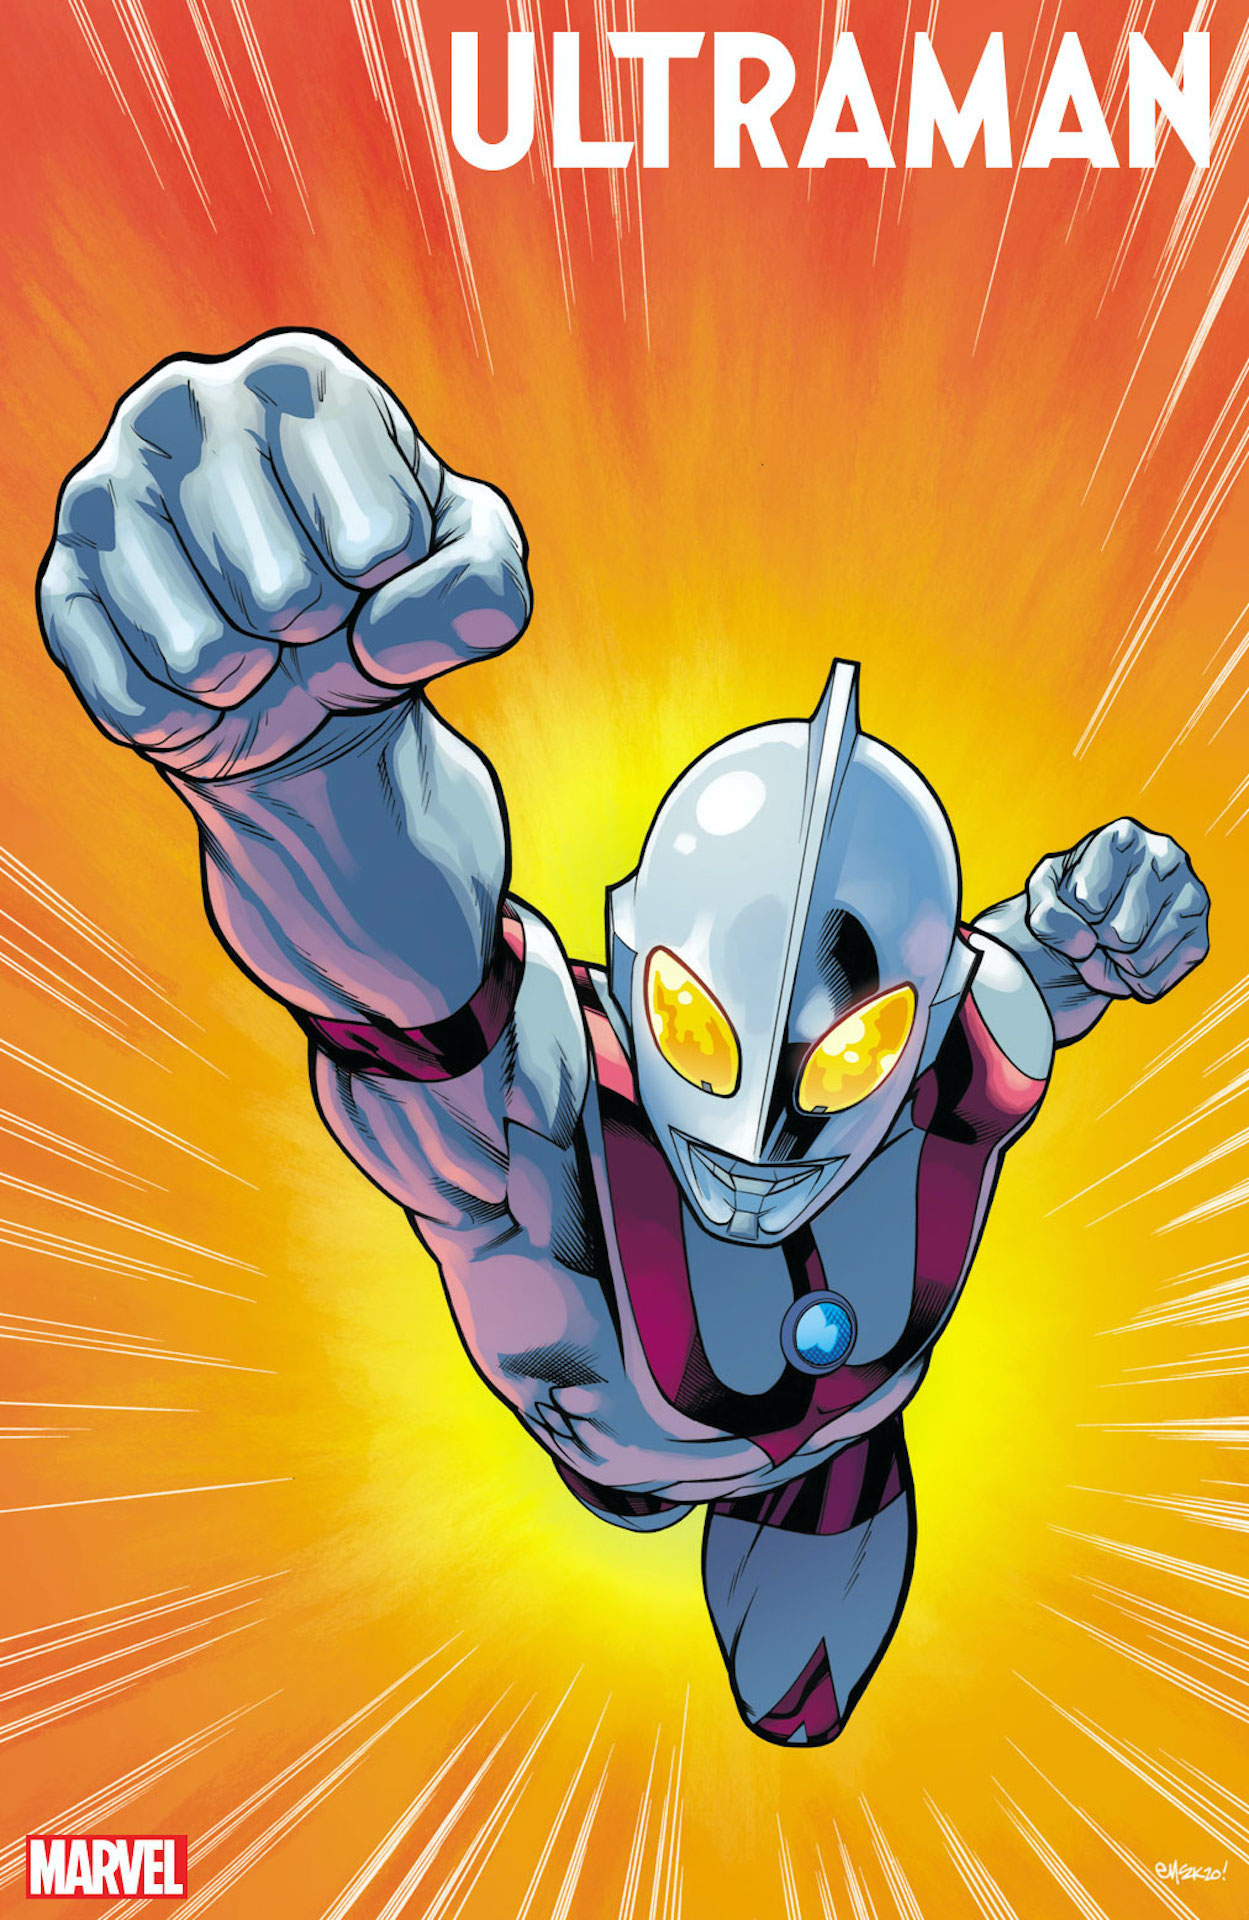 Marvel Comics First Look: Cover and story details revealed for Ultraman